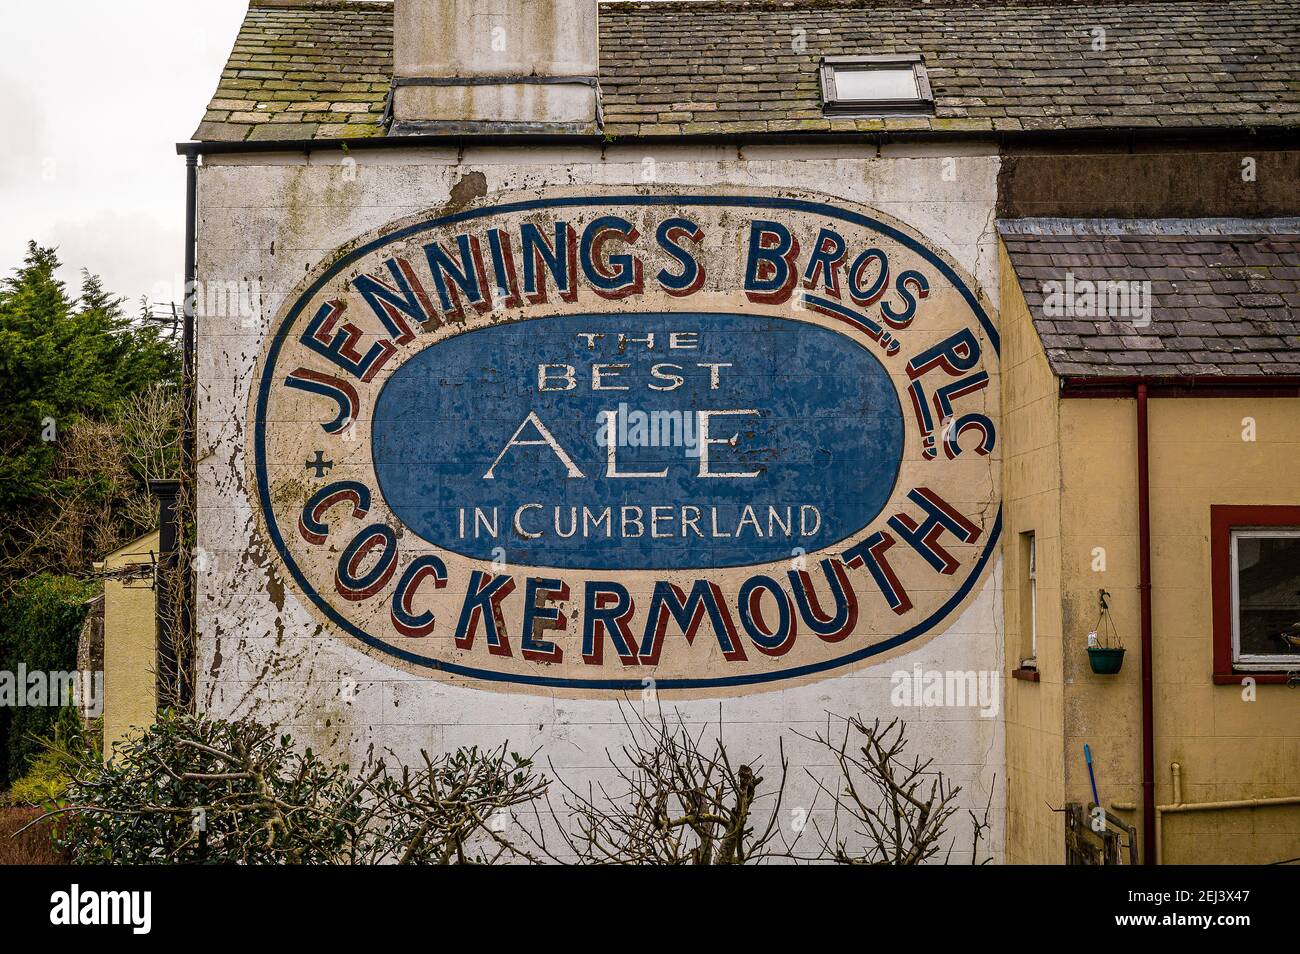 Jennings Bros sign painted on a building in Cockermouth Stock Photo